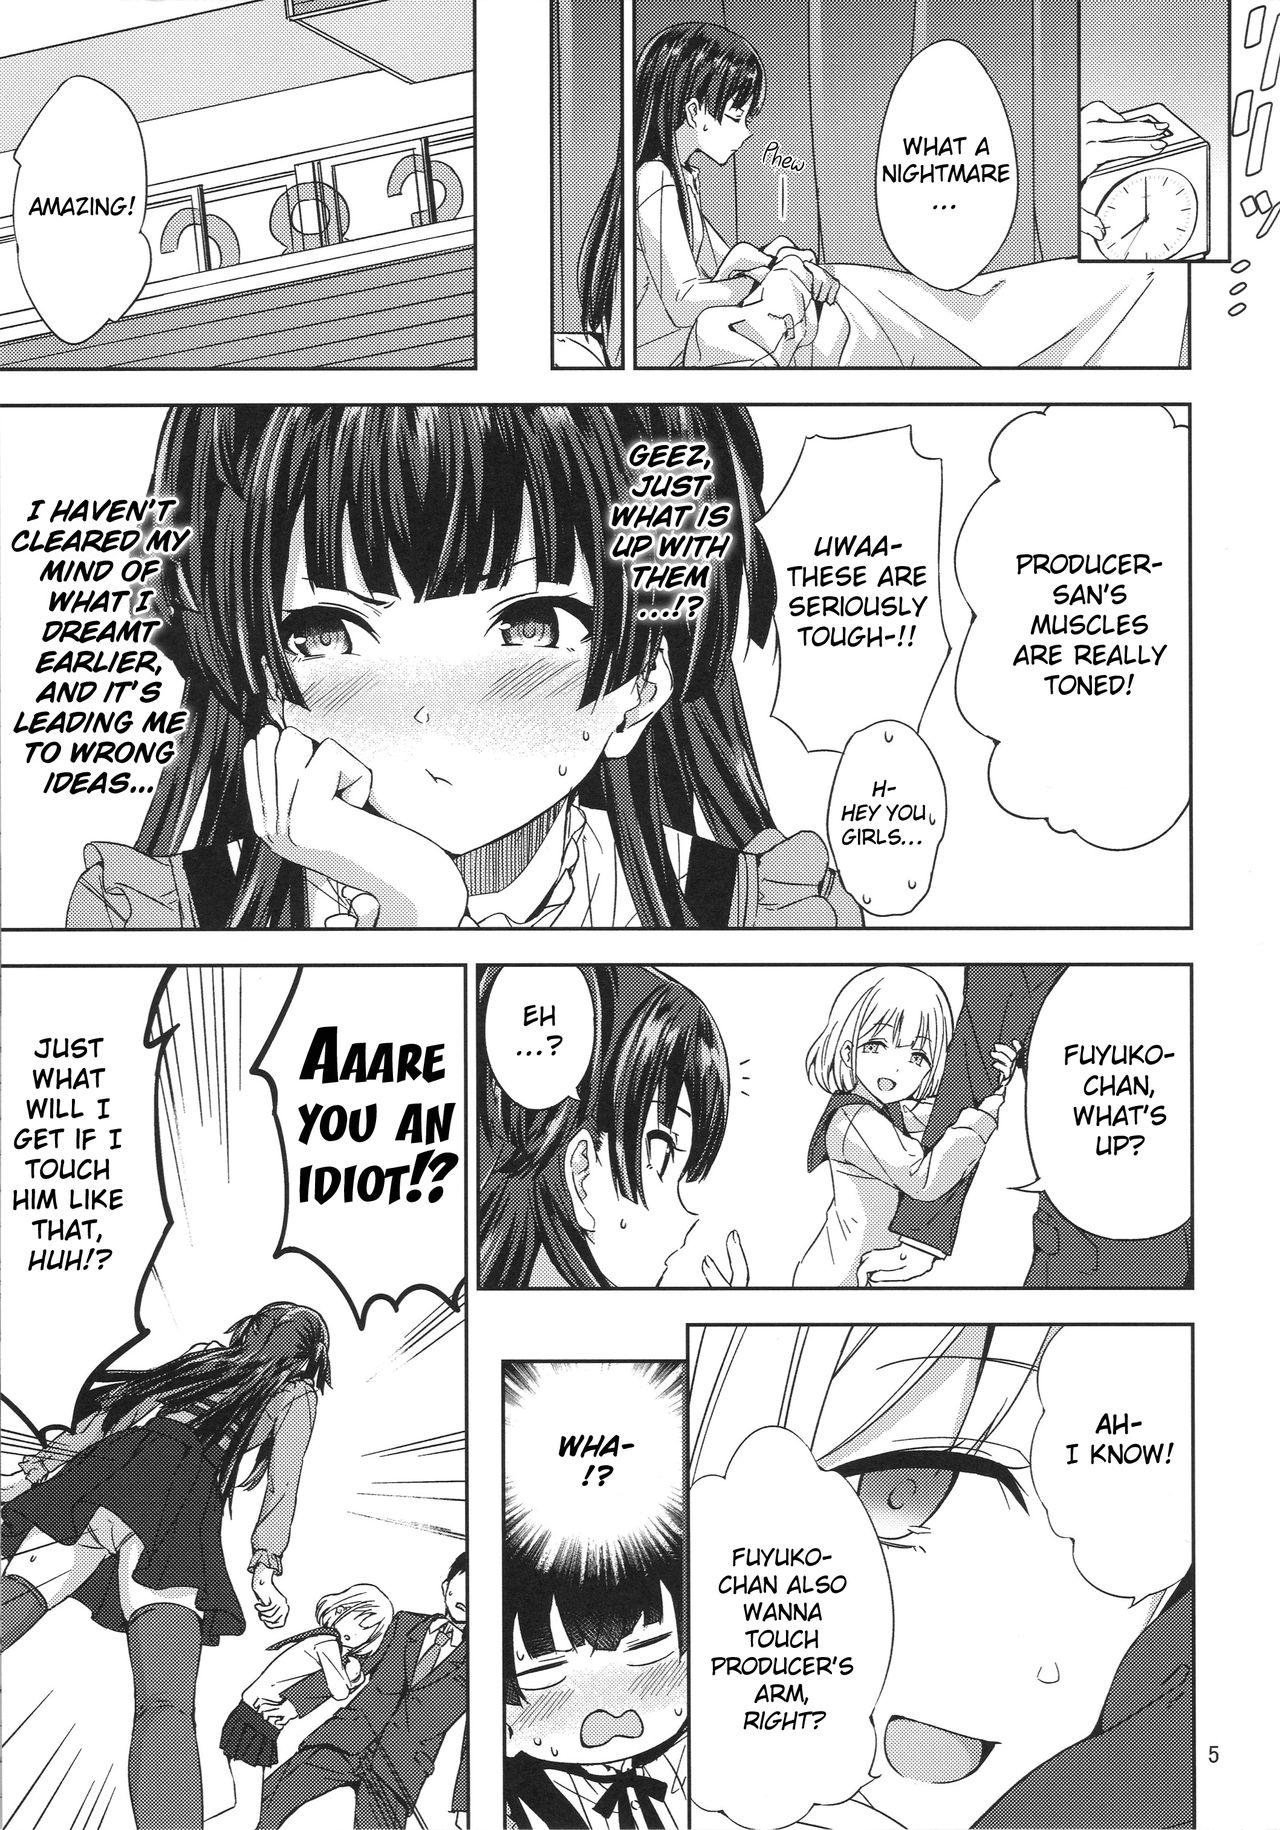 Cheating Wife Fuyu Koi. - The idolmaster Rough Sex - Page 6